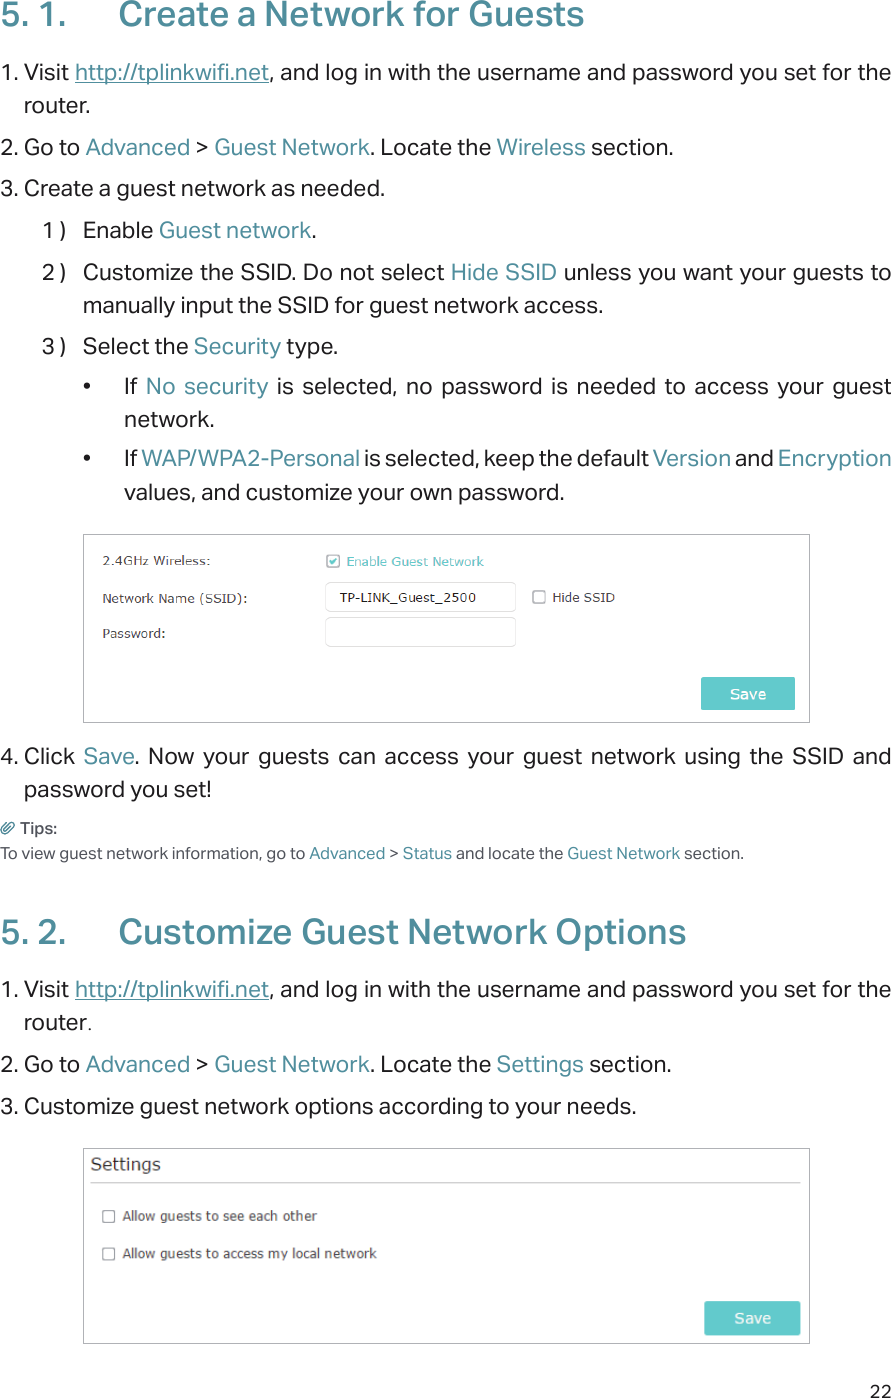 225. 1.  Create a Network for Guests 1. Visit http://tplinkwifi.net, and log in with the username and password you set for the router.2. Go to Advanced &gt; Guest Network. Locate the Wireless section.3. Create a guest network as needed.1 )  Enable Guest network.2 )  Customize the SSID. Do not select Hide SSID unless you want your guests to manually input the SSID for guest network access.3 )  Select the Security type.•  If  No security is selected, no password is needed to access your guest network. •  If WAP/WPA2-Personal is selected, keep the default Version and Encryption values, and customize your own password.4. Click  Save. Now your guests can access your guest network using the SSID and password you set!Tips:To view guest network information, go to Advanced &gt; Status and locate the Guest Network section.5. 2.  Customize Guest Network Options1. Visit http://tplinkwifi.net, and log in with the username and password you set for the router.2. Go to Advanced &gt; Guest Network. Locate the Settings section.3. Customize guest network options according to your needs.